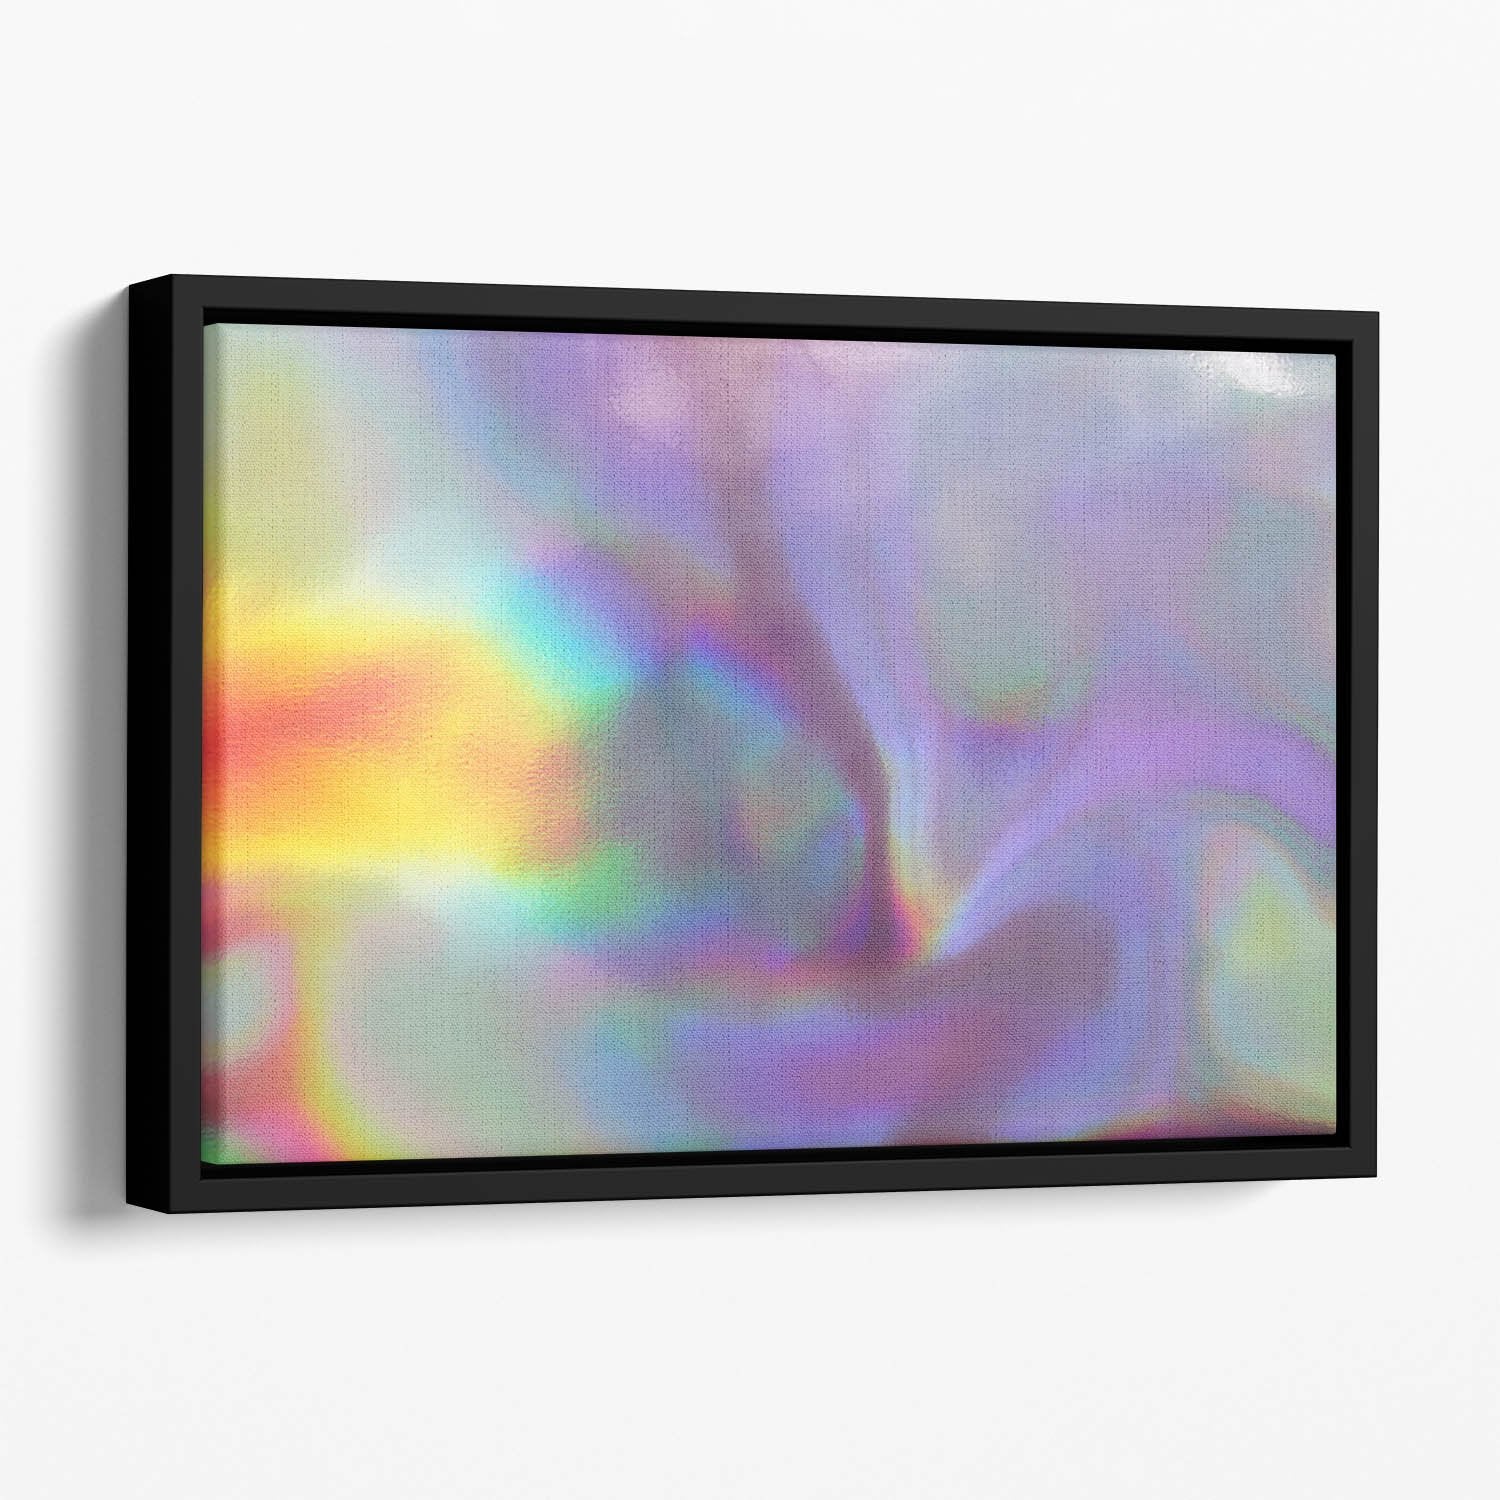 Holographic texture 2 Floating Framed Canvas